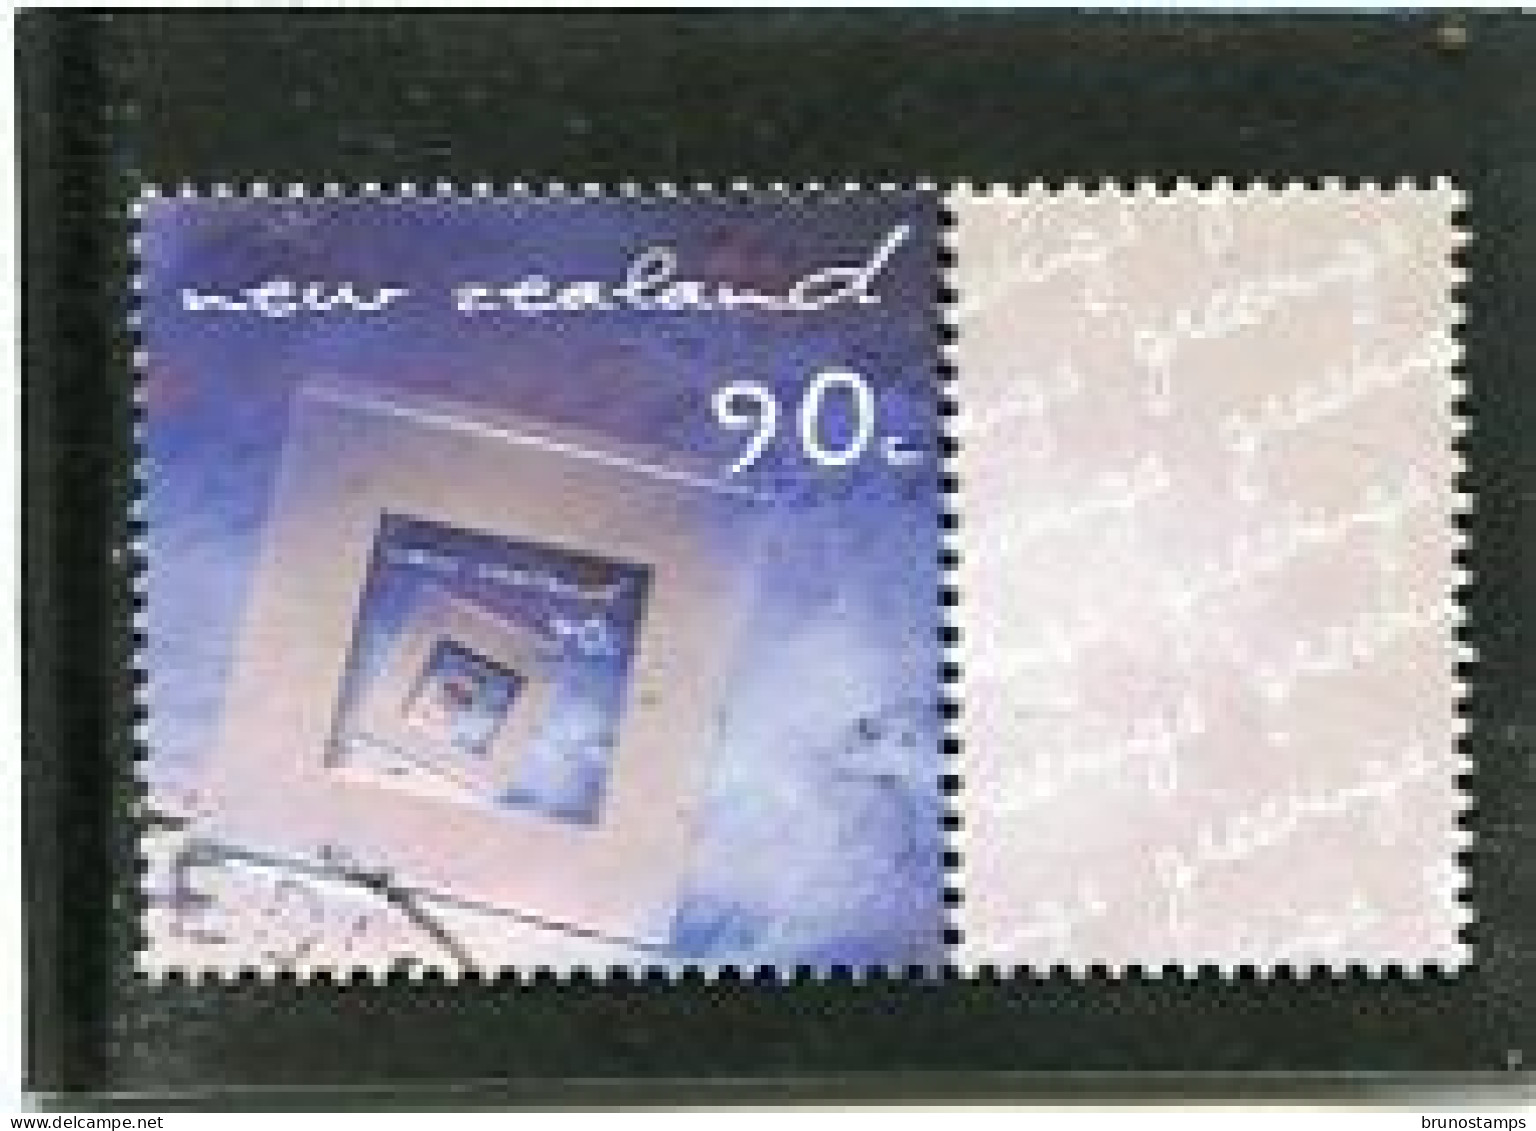 NEW ZEALAND - 2001  90c  GREETINGS  PHOTOFRAME  FINE  USED - Used Stamps